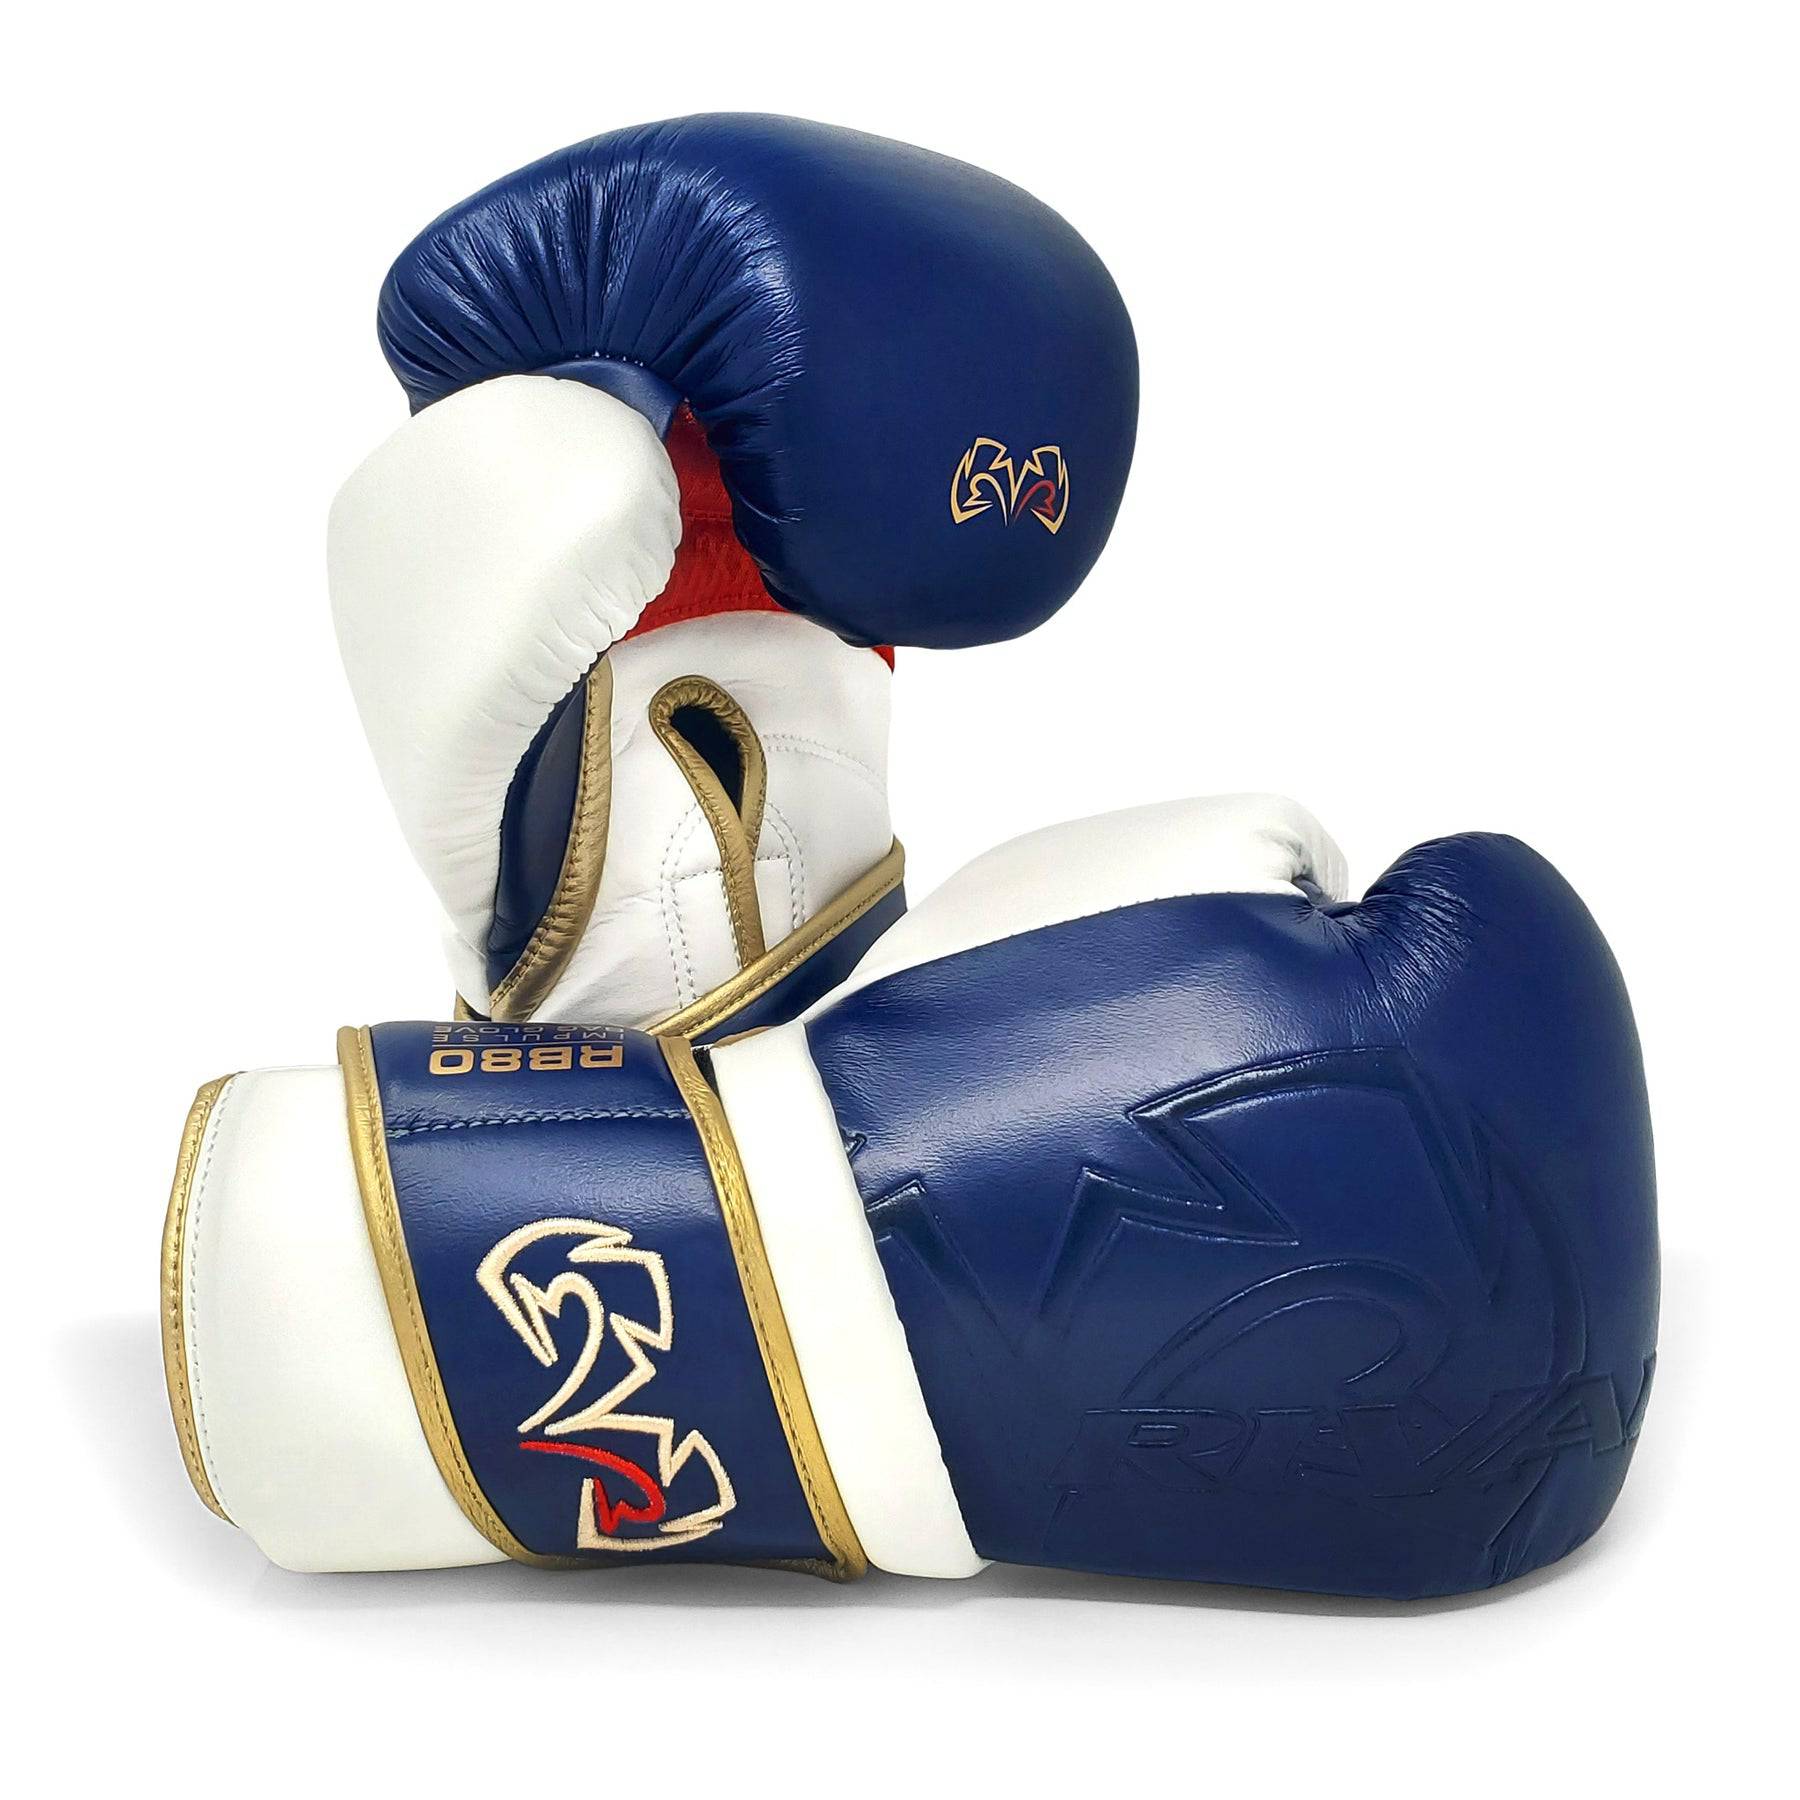 Rival | Bag Glove - RB80 Impulse - XTC Fitness - Exercise Equipment Superstore - Canada - Bag Gloves